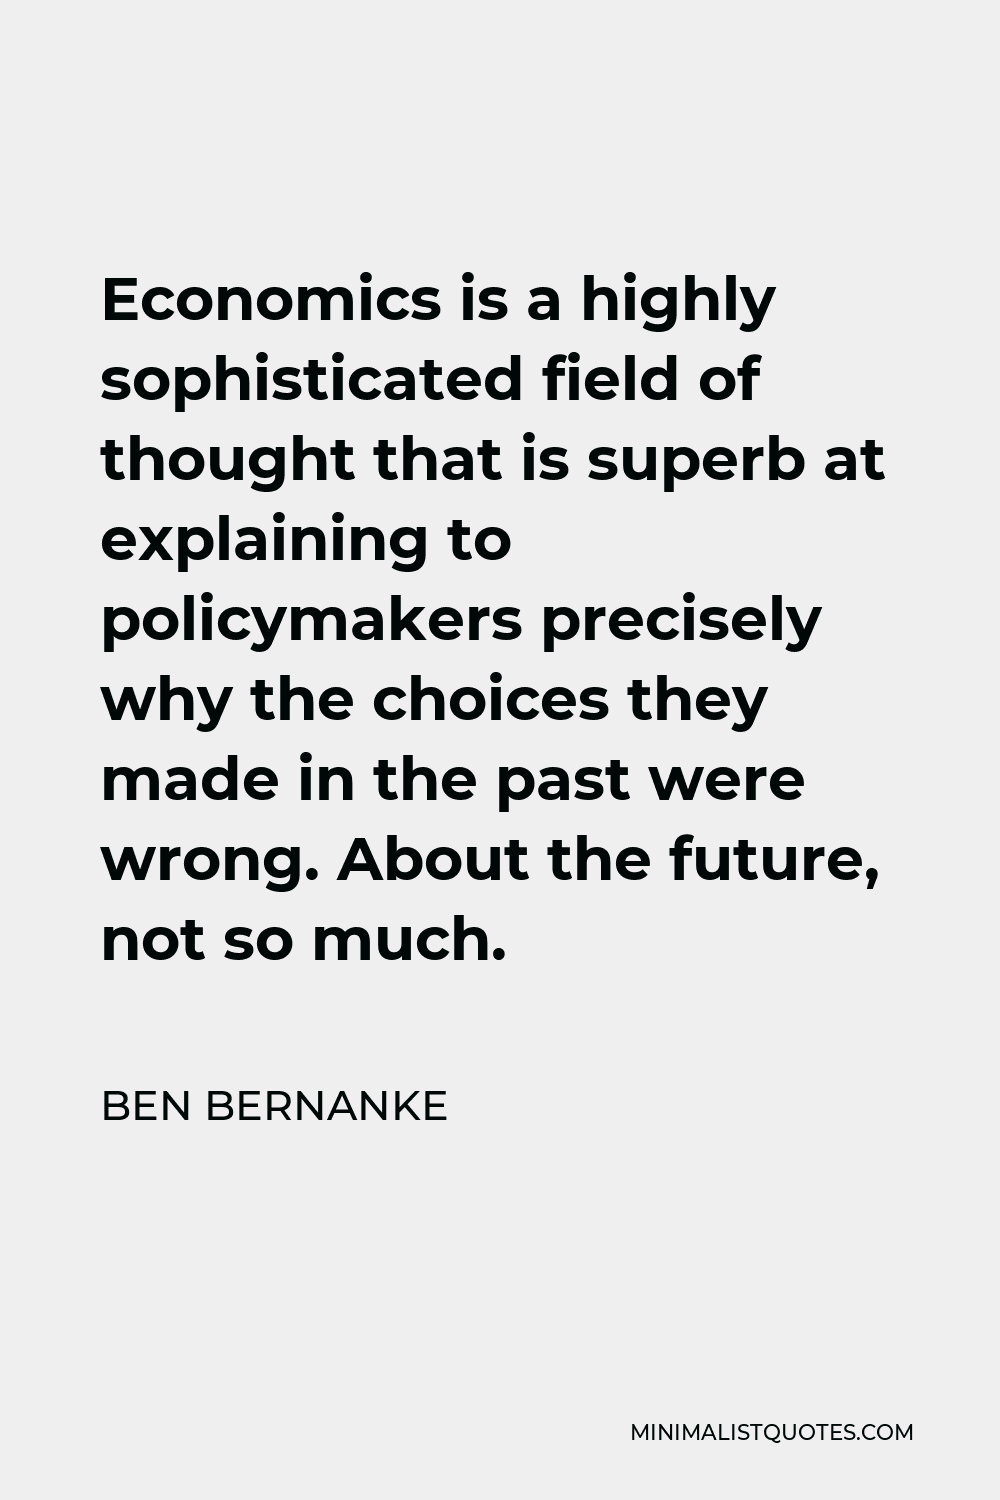 Ben Bernanke Quote - Economics is a highly sophisticated field of thought that is superb at explaining to policymakers precisely why the choices they made in the past were wrong. About the future, not so much.